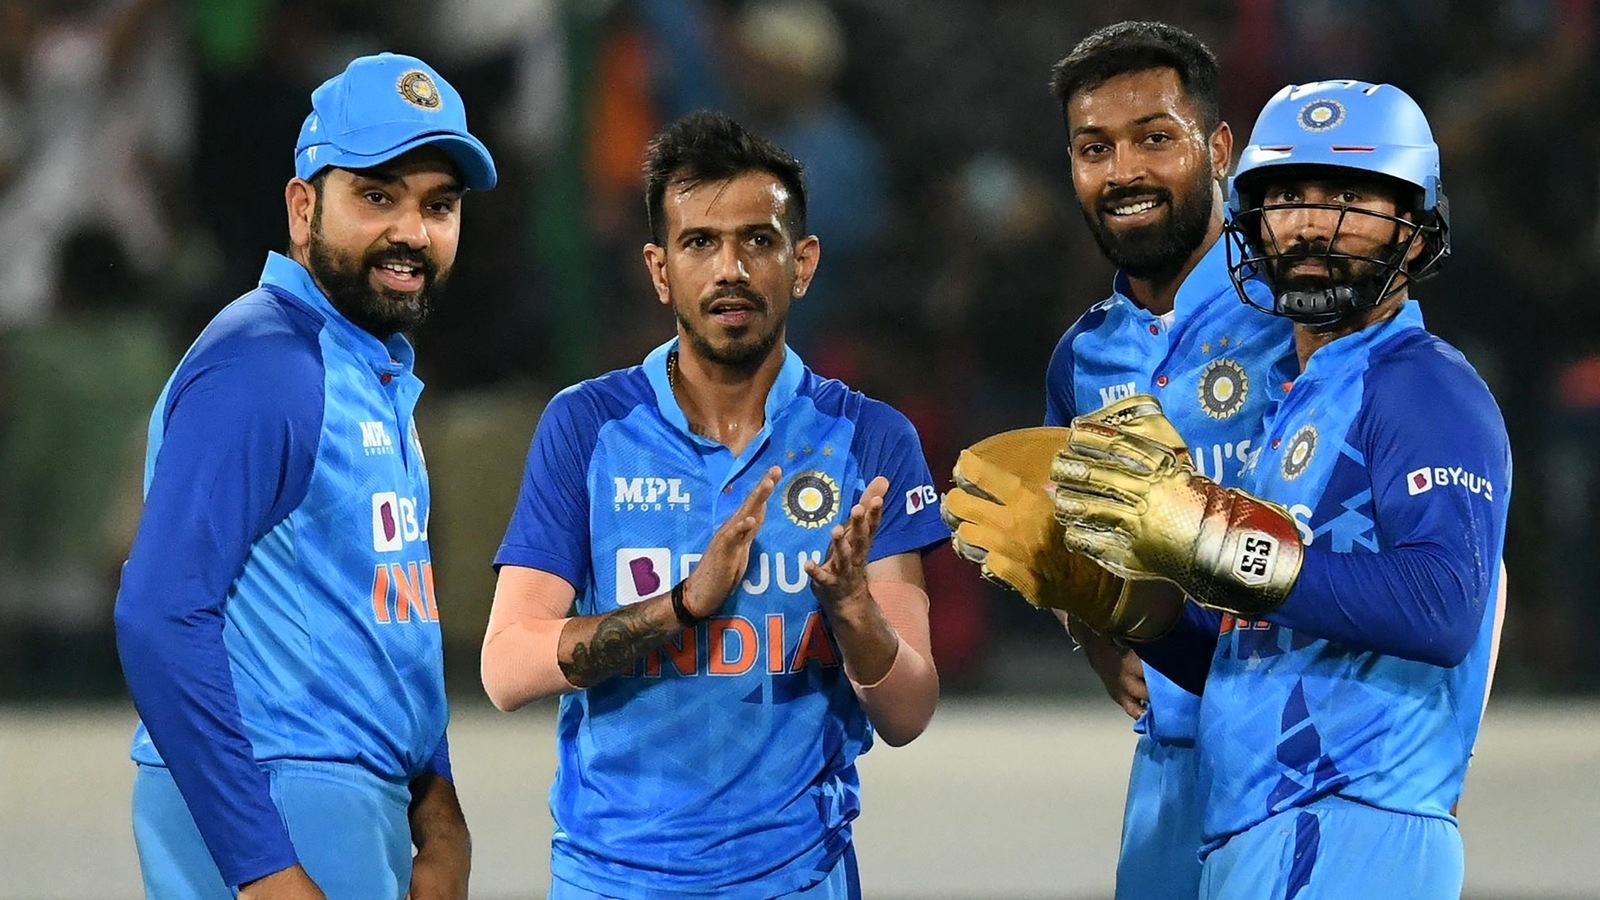 pakistan-a-good-team-but-yuzvendra-chahal-has-his-say-ahead-of-big-ticket-ind-vs-pak-t20-world-cup-clash